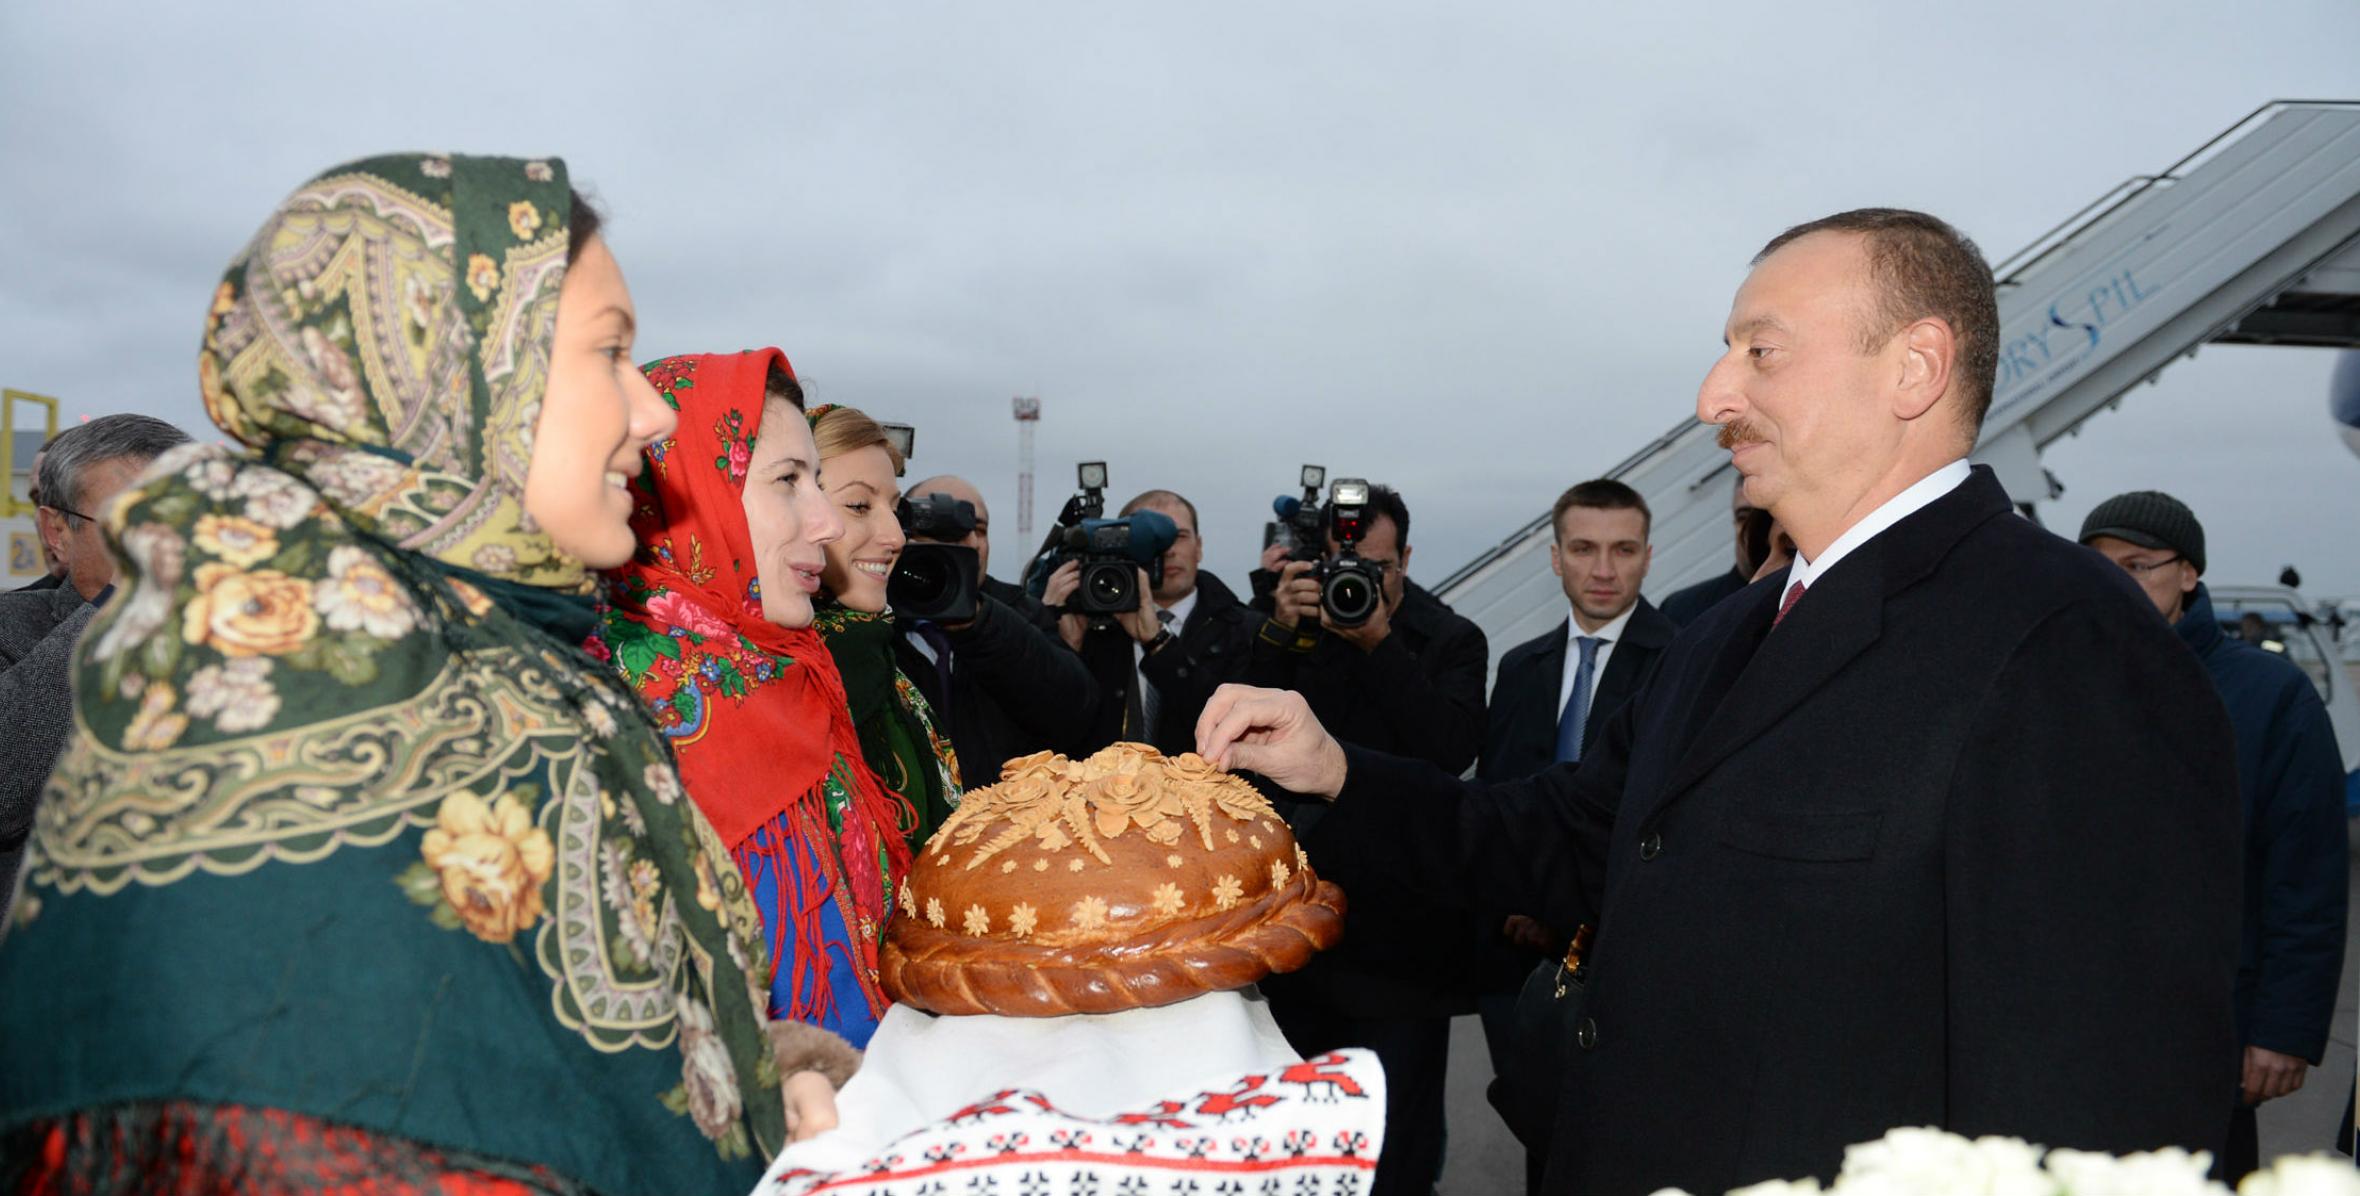 Ilham Aliyev has arrived in Ukraine on an official visit